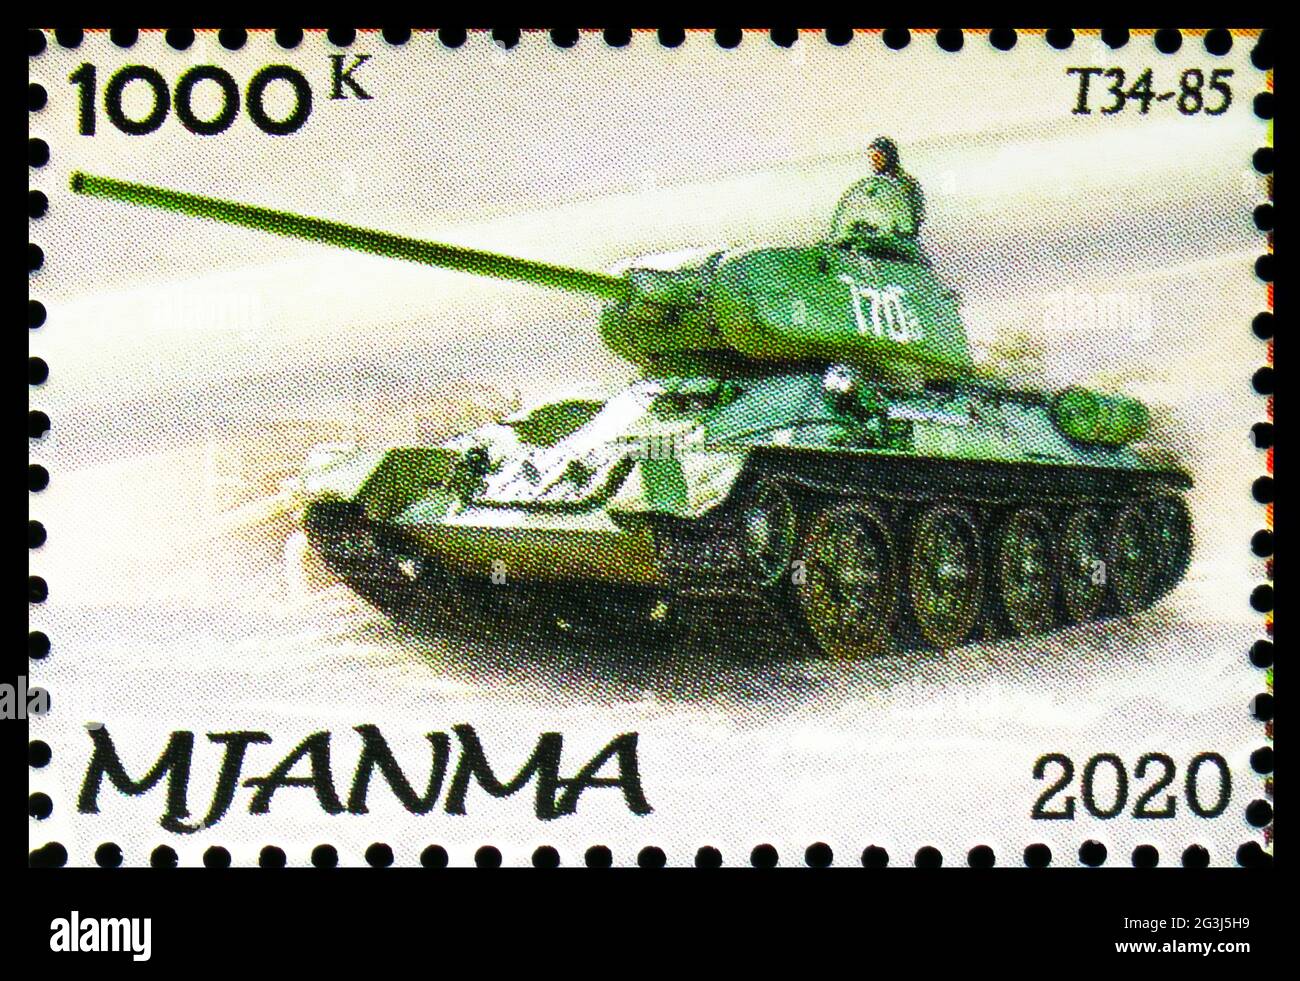 MOSCOW, RUSSIA - APRIL 17, 2021: Postage stamp printed in Cinderellas shows T34-85, Myanmar serie, circa 2020 Stock Photo